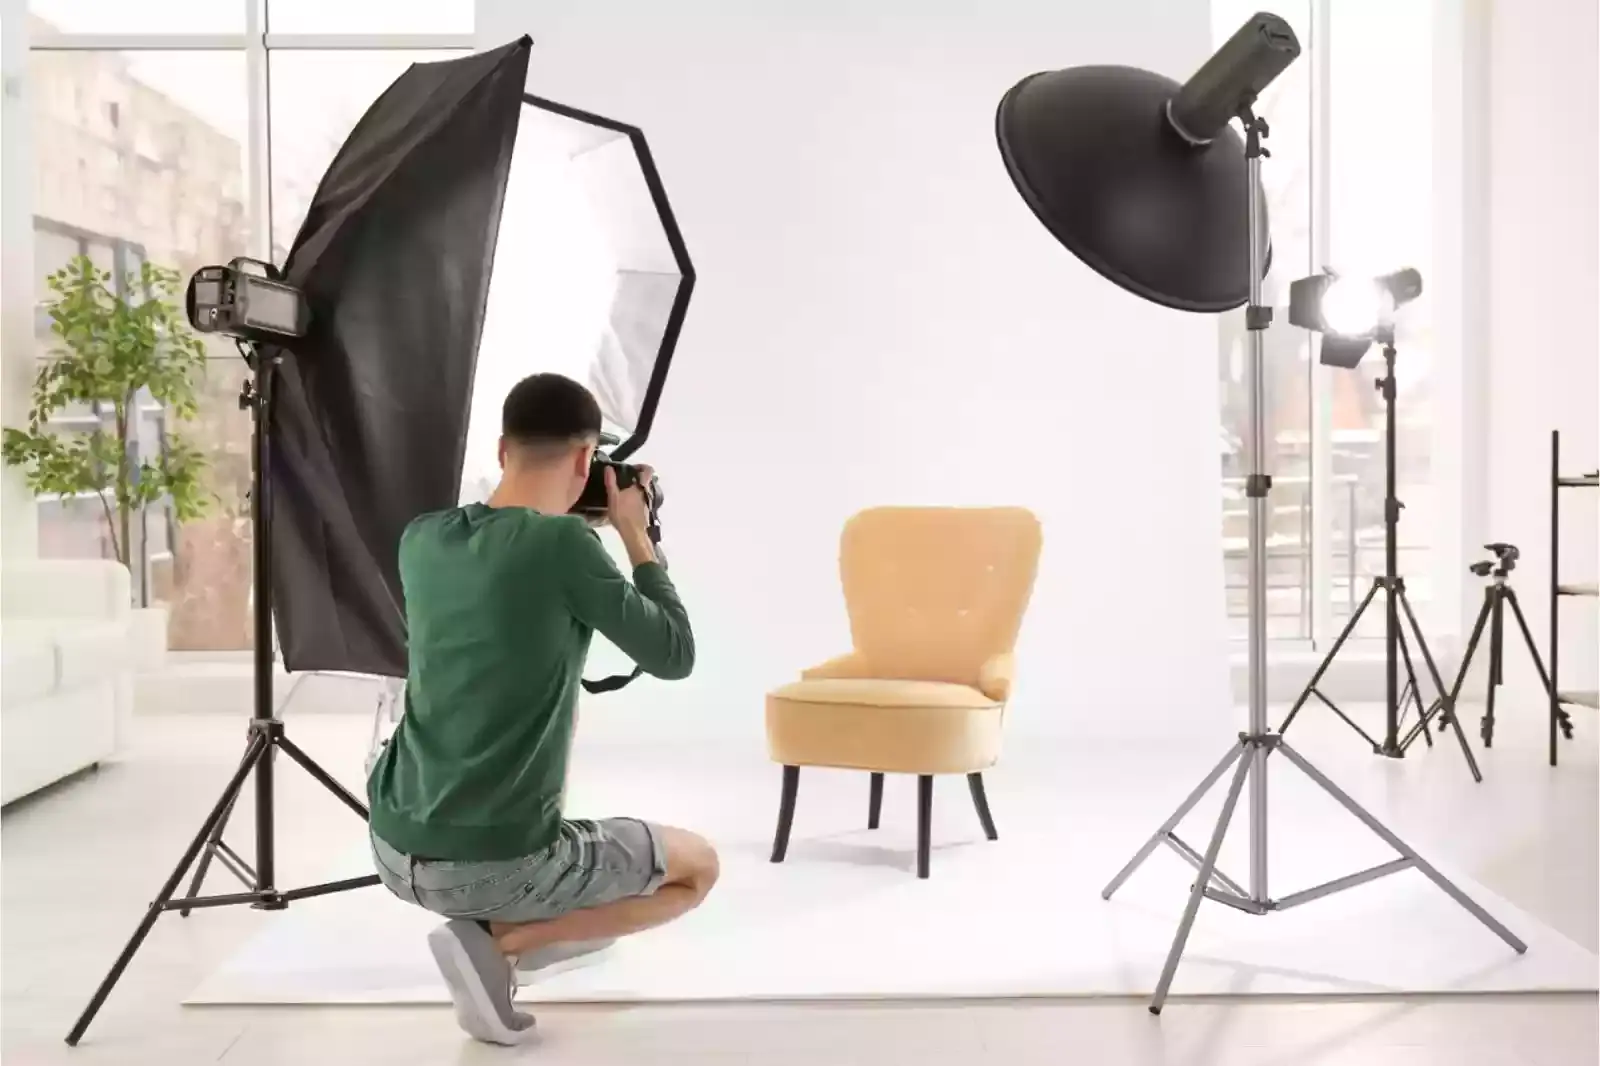 Ten tips for Conquering E-Commerce product photography